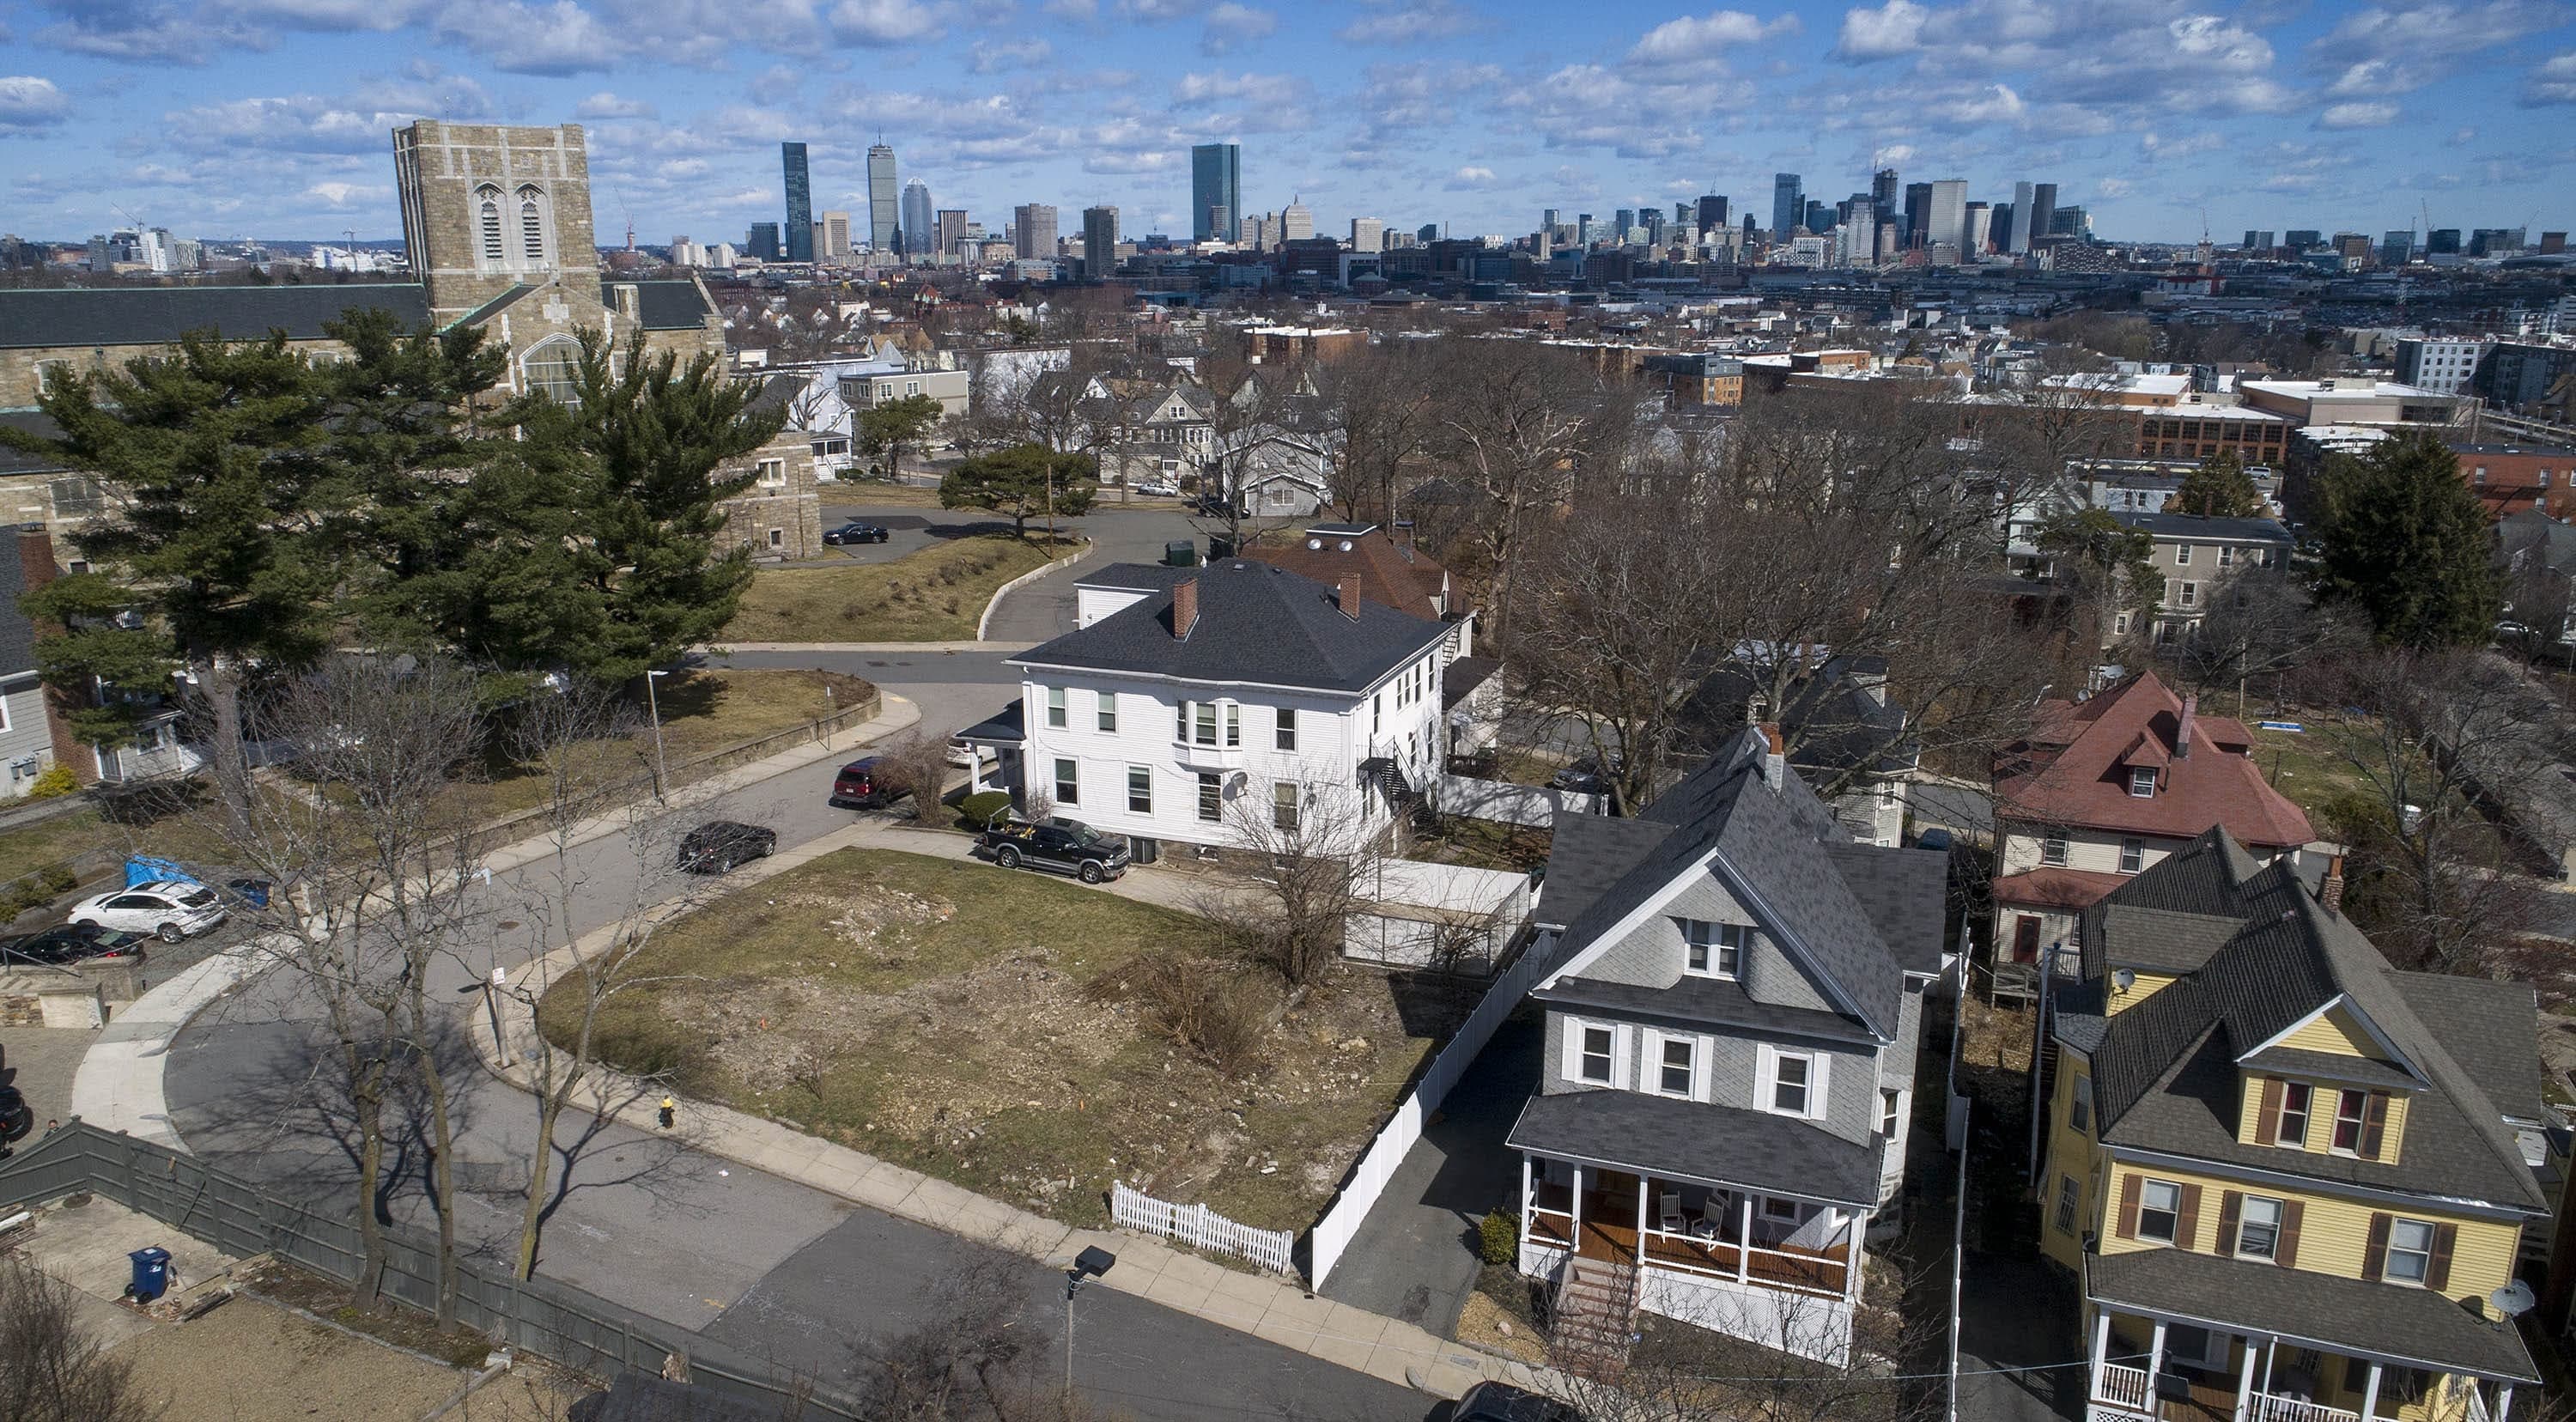 The lot at 7 Half Moon Street in Roxbury will be the site of two new dwellings in the Dudley Street Neighborhood Initiative's plan. (Robin Lubbock/WBUR)